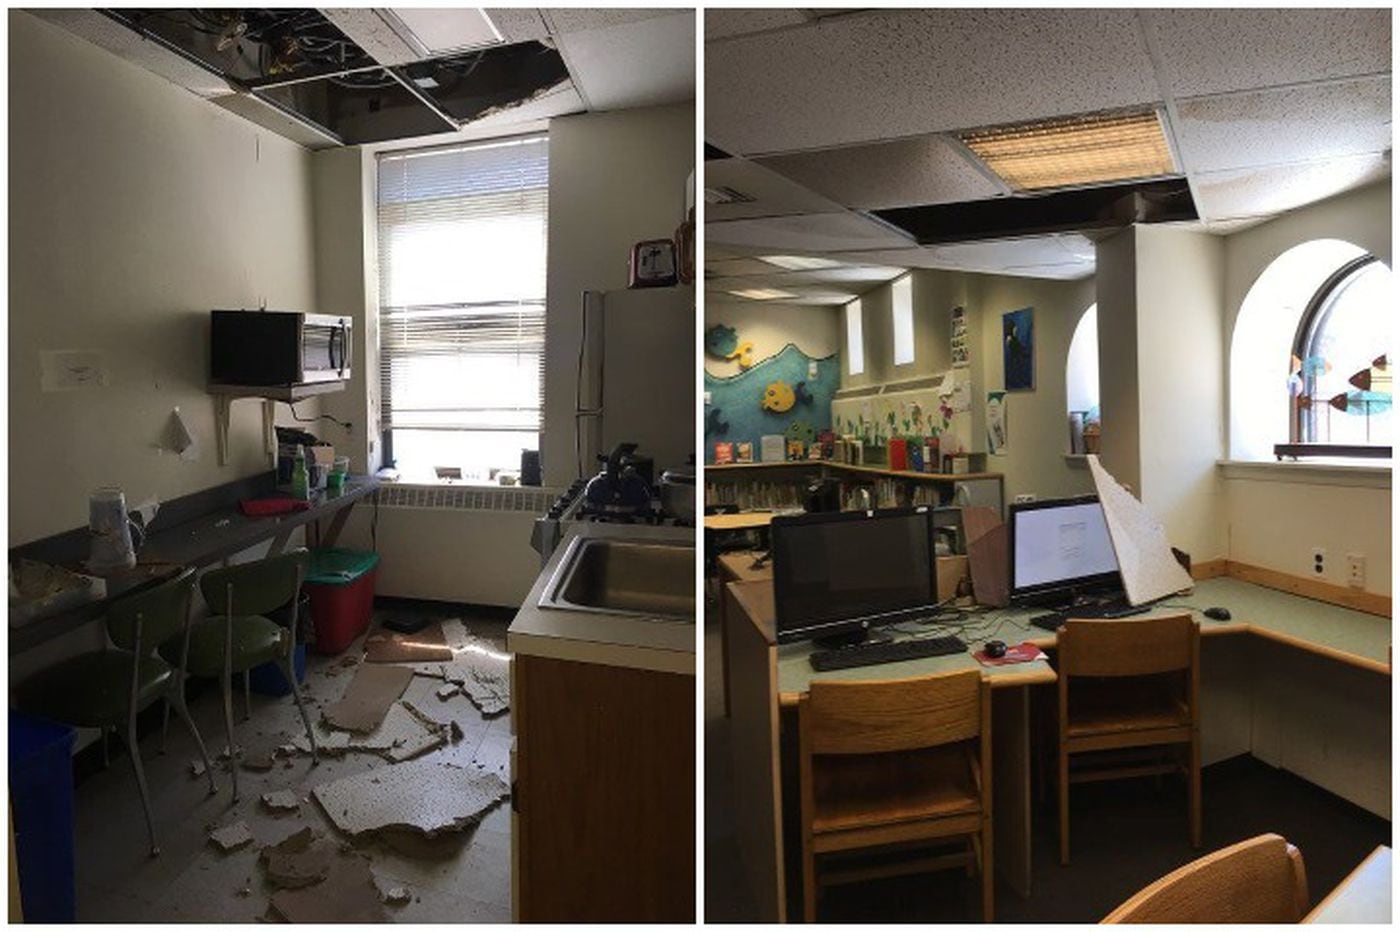 Collapse Of Fishtown Library Ceiling Latest Building Woe For